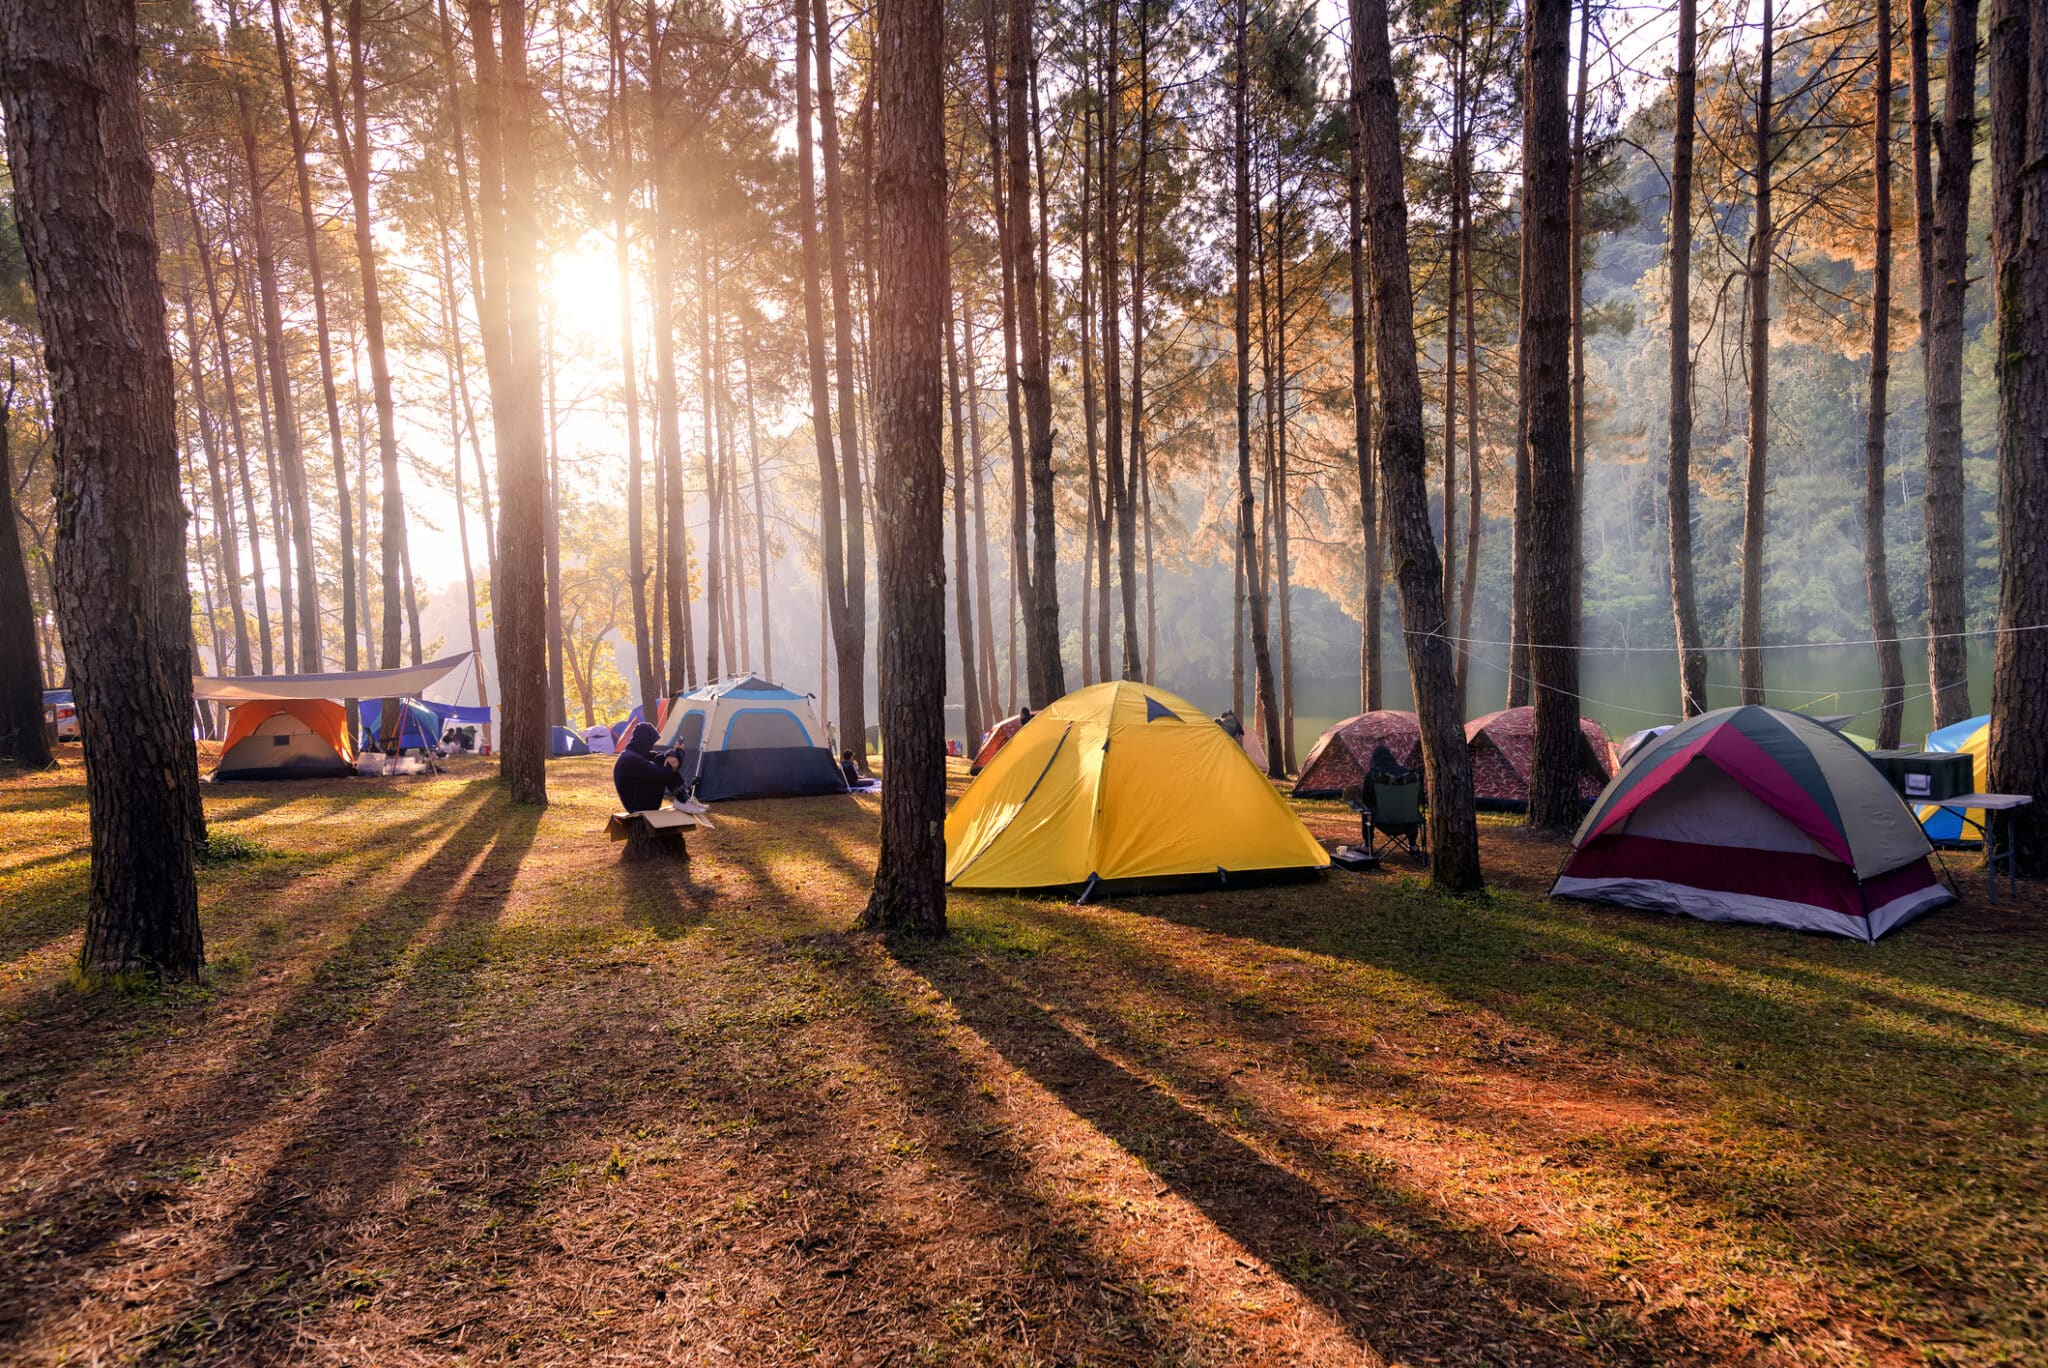 How to Master Pandemic Camping - Sierra Club